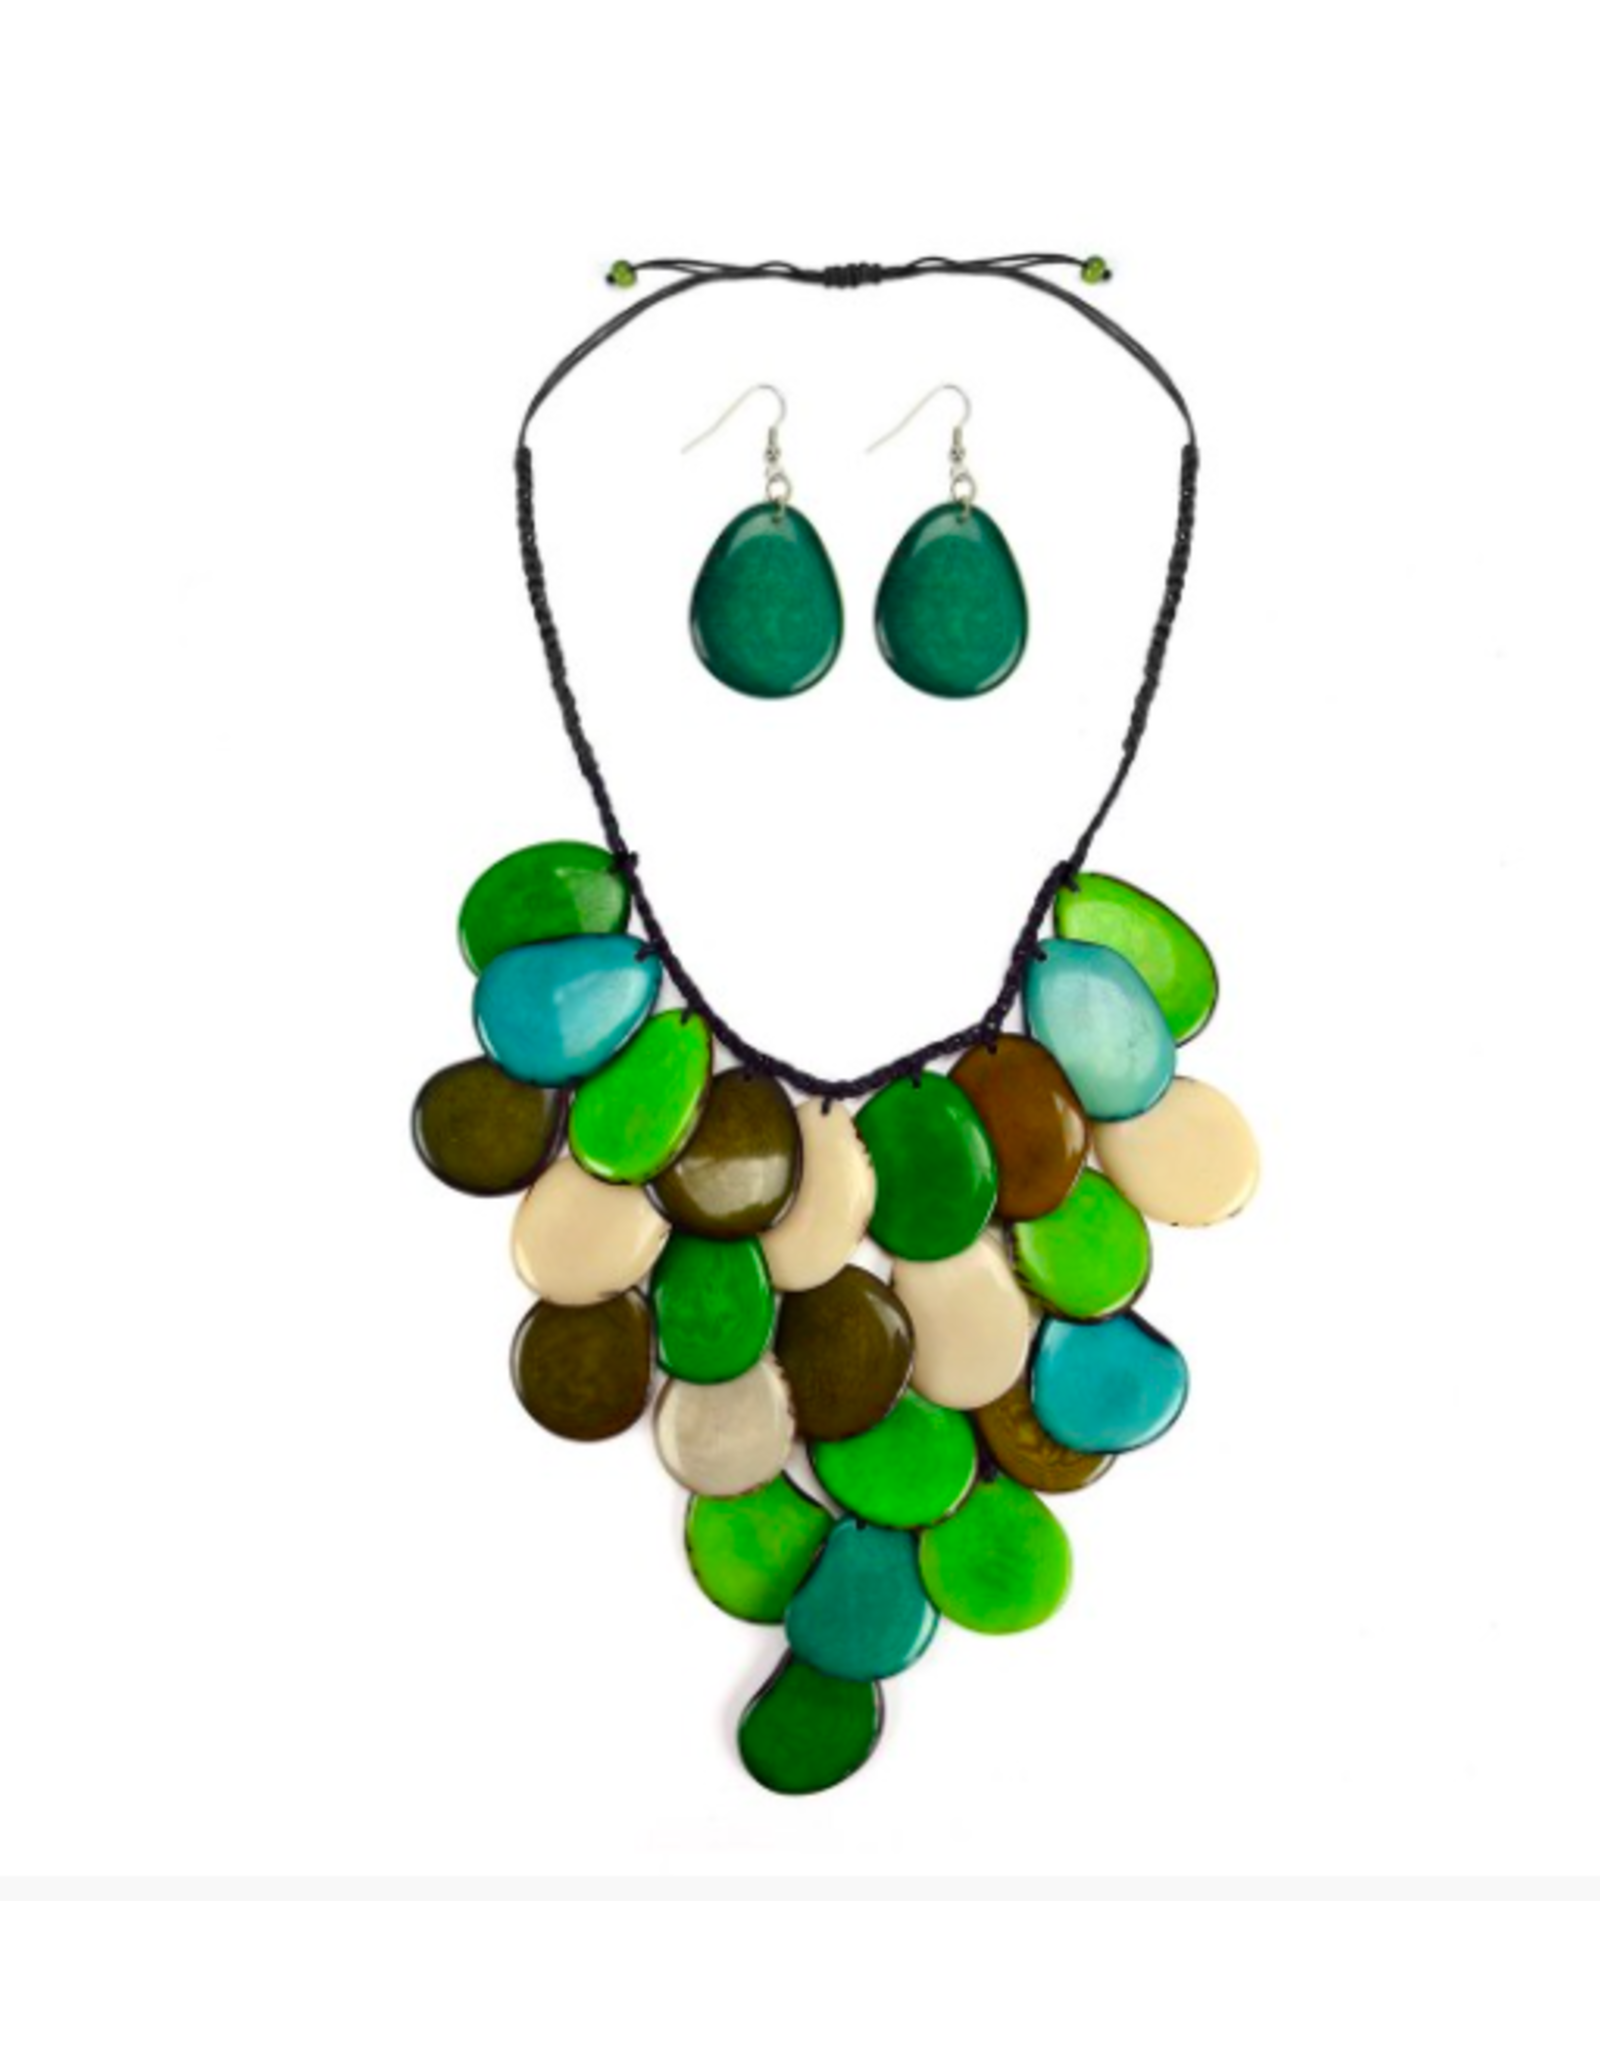 Trade roots Waterfall Tagua Nut Necklace - Lime